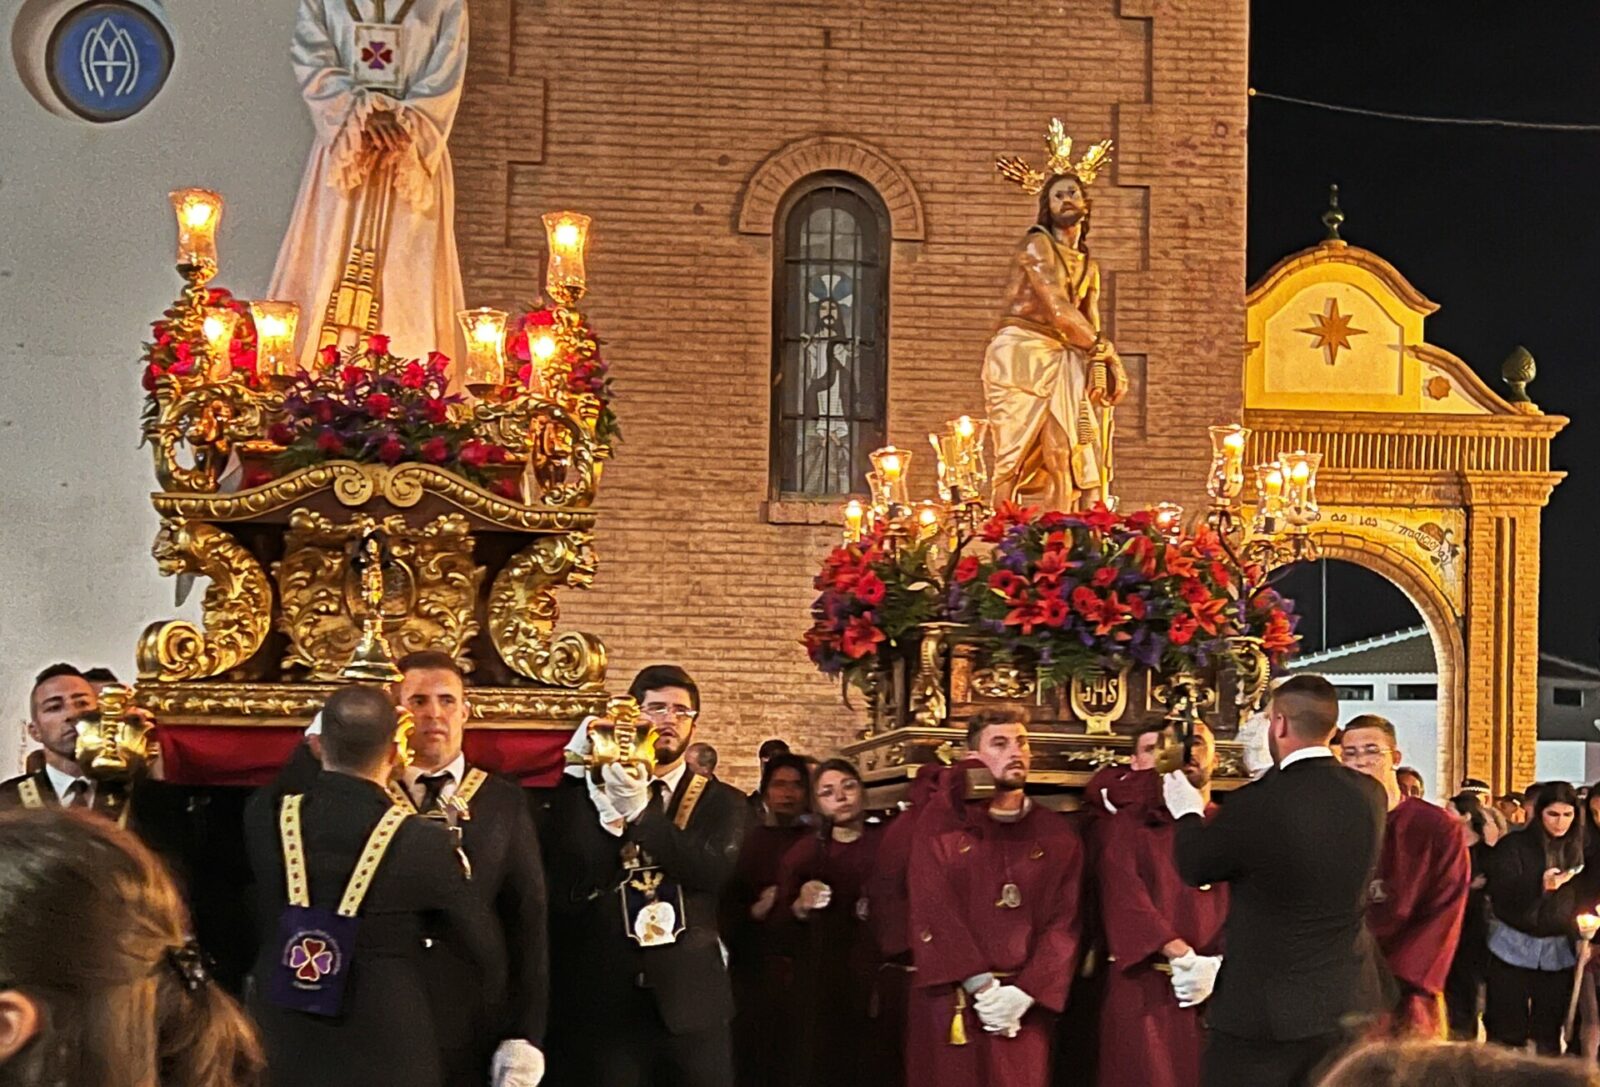 Photo depicts Semana Santa in Cómpeta which is in Malaga province. The blog aims to explore the cultural differences between Semana Santa in a town and in a city.